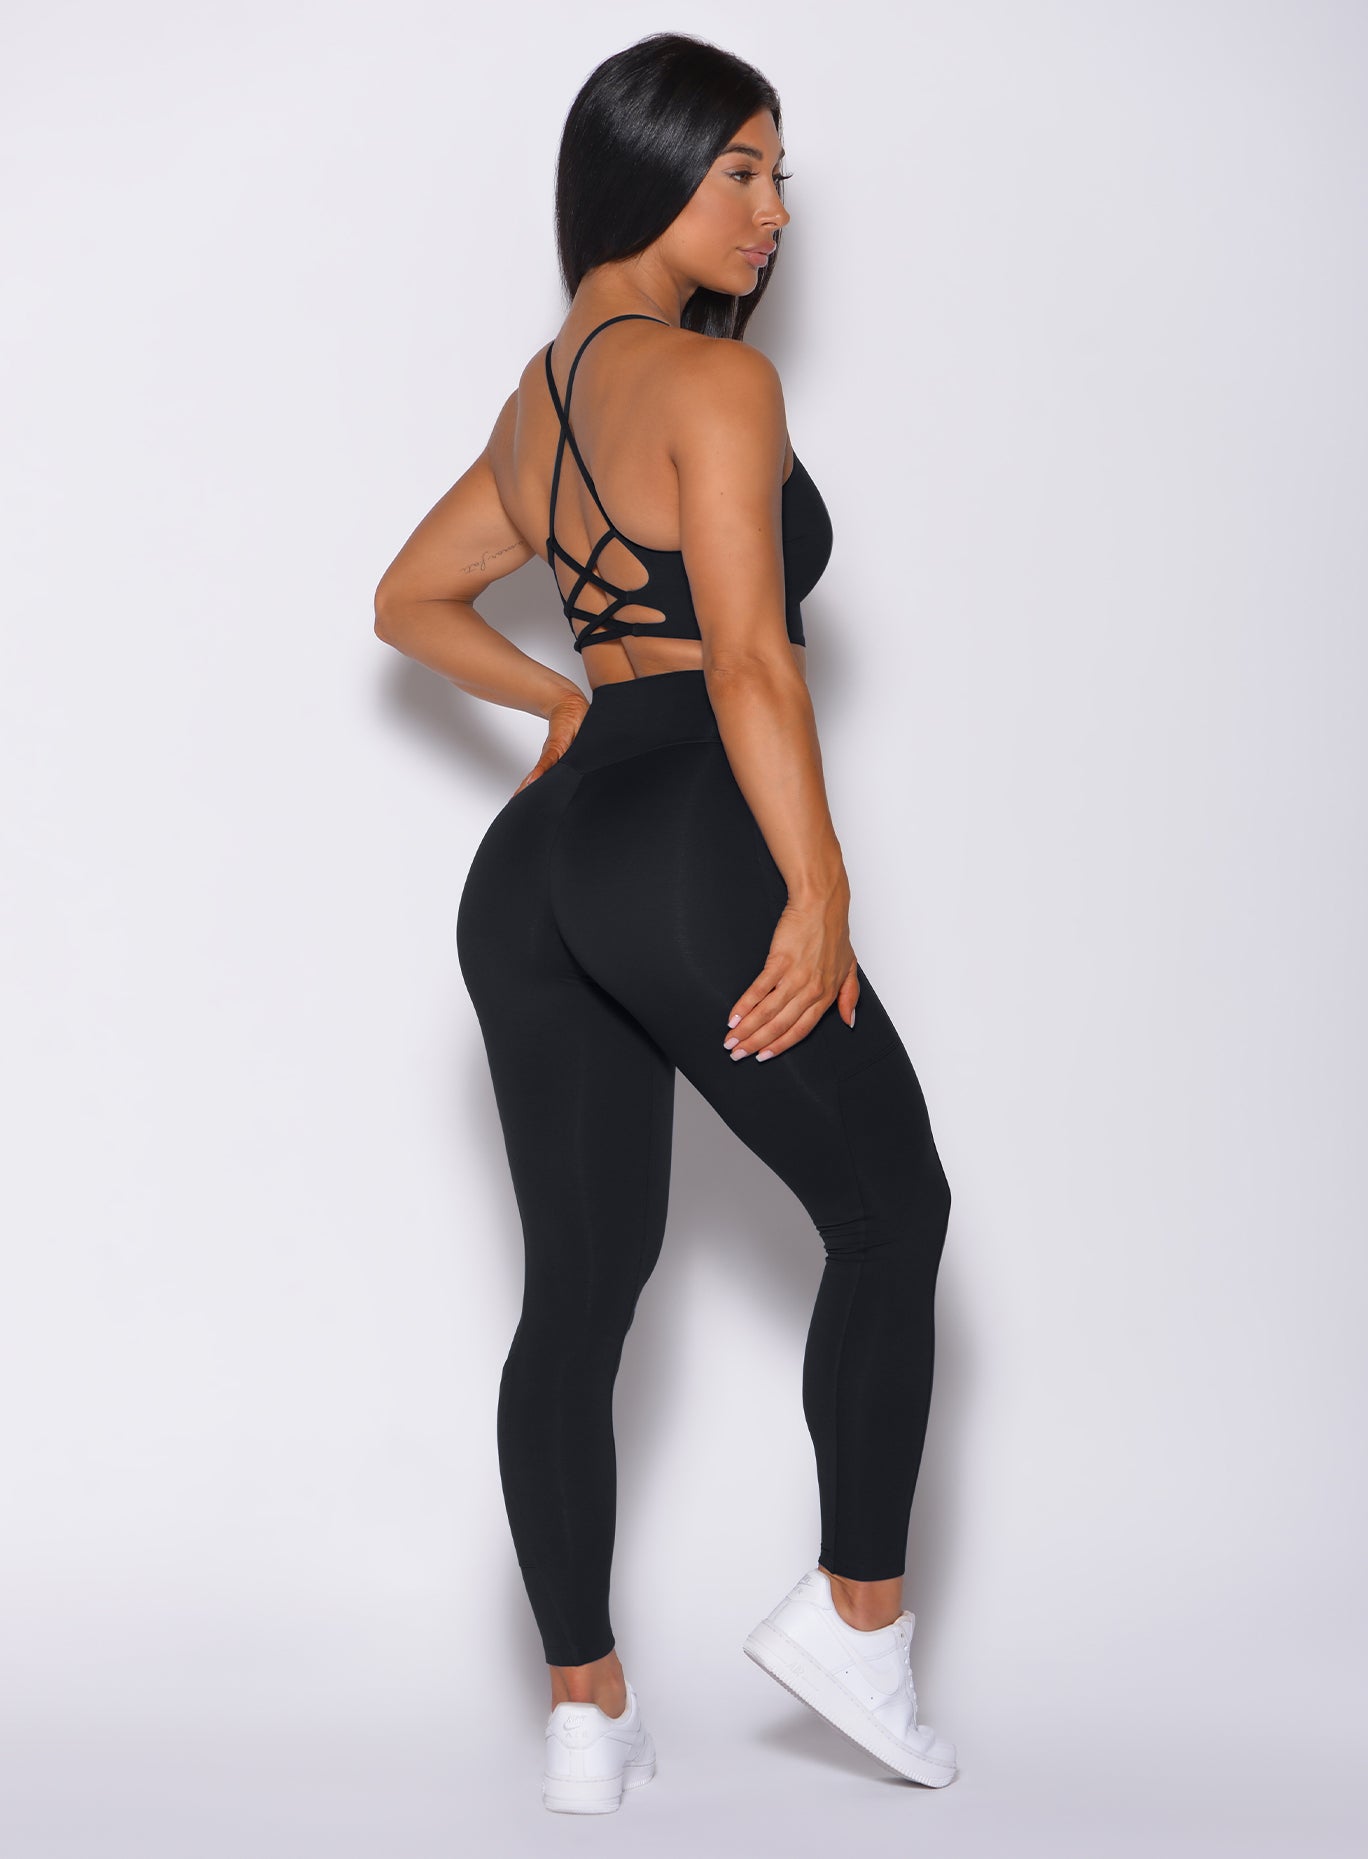 Right side profile view of a model wearing our black empower leggings and a matching bra